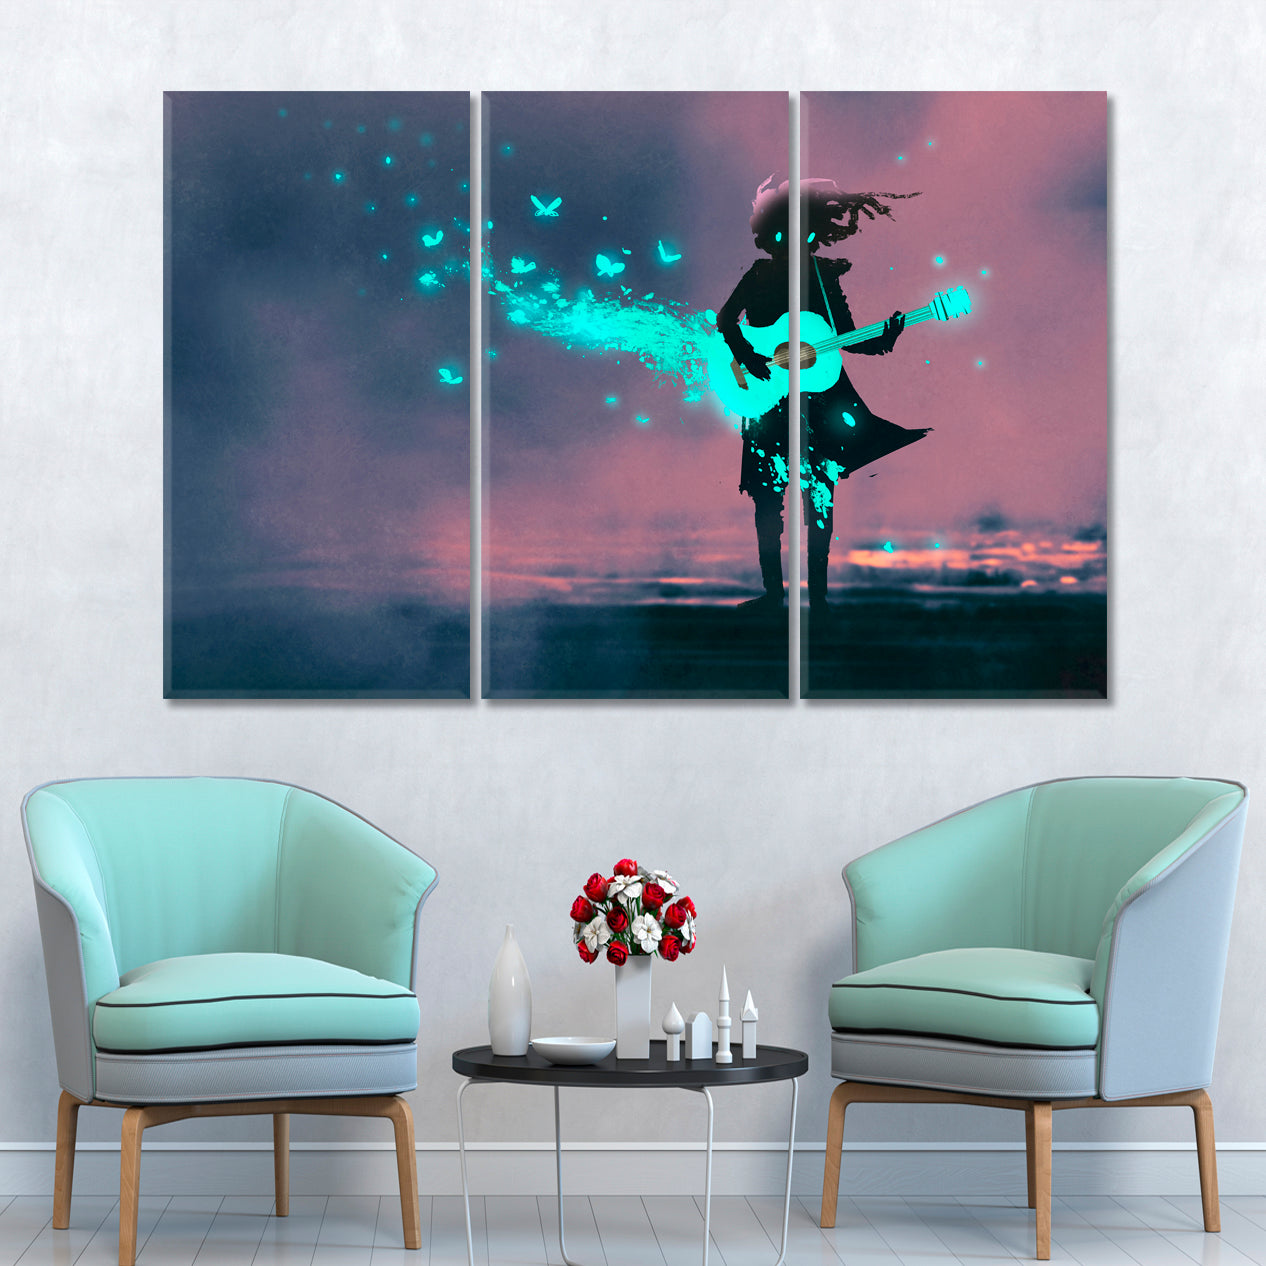 MUSIC OF THE NIGHT Fantastic Neon Glowing Guitar Sparks Purple Space Surreal Fantasy Large Art Print Décor Artesty 3 panels 36" x 24" 